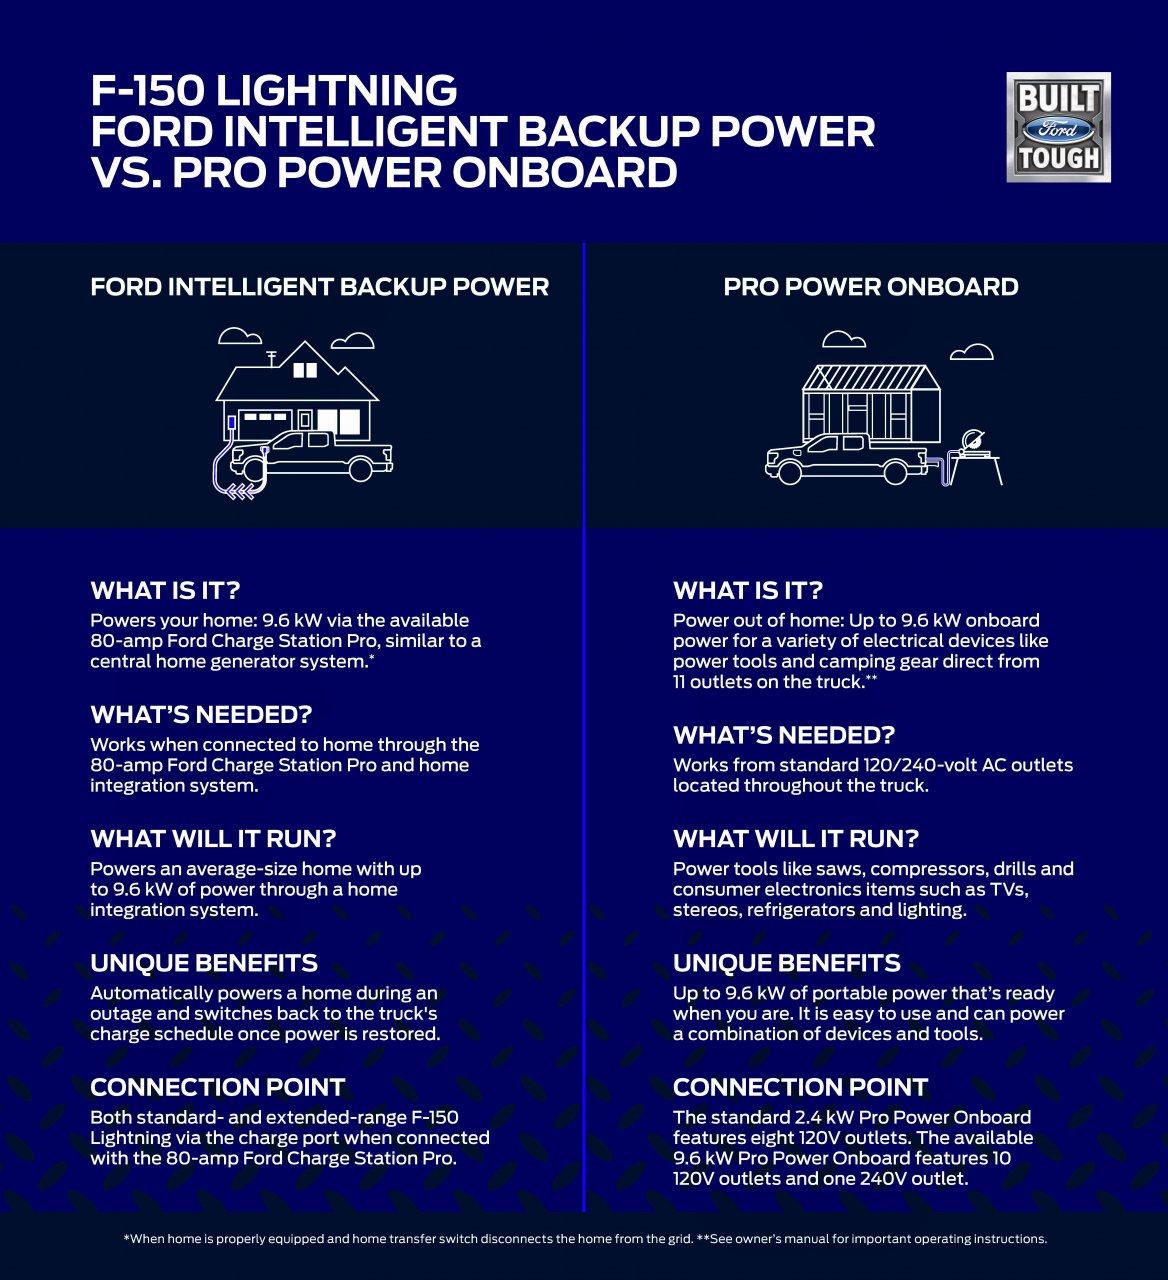 Lightning, Ford says F-150 Lightning is a truck and an electric power plant, ClassicCars.com Journal